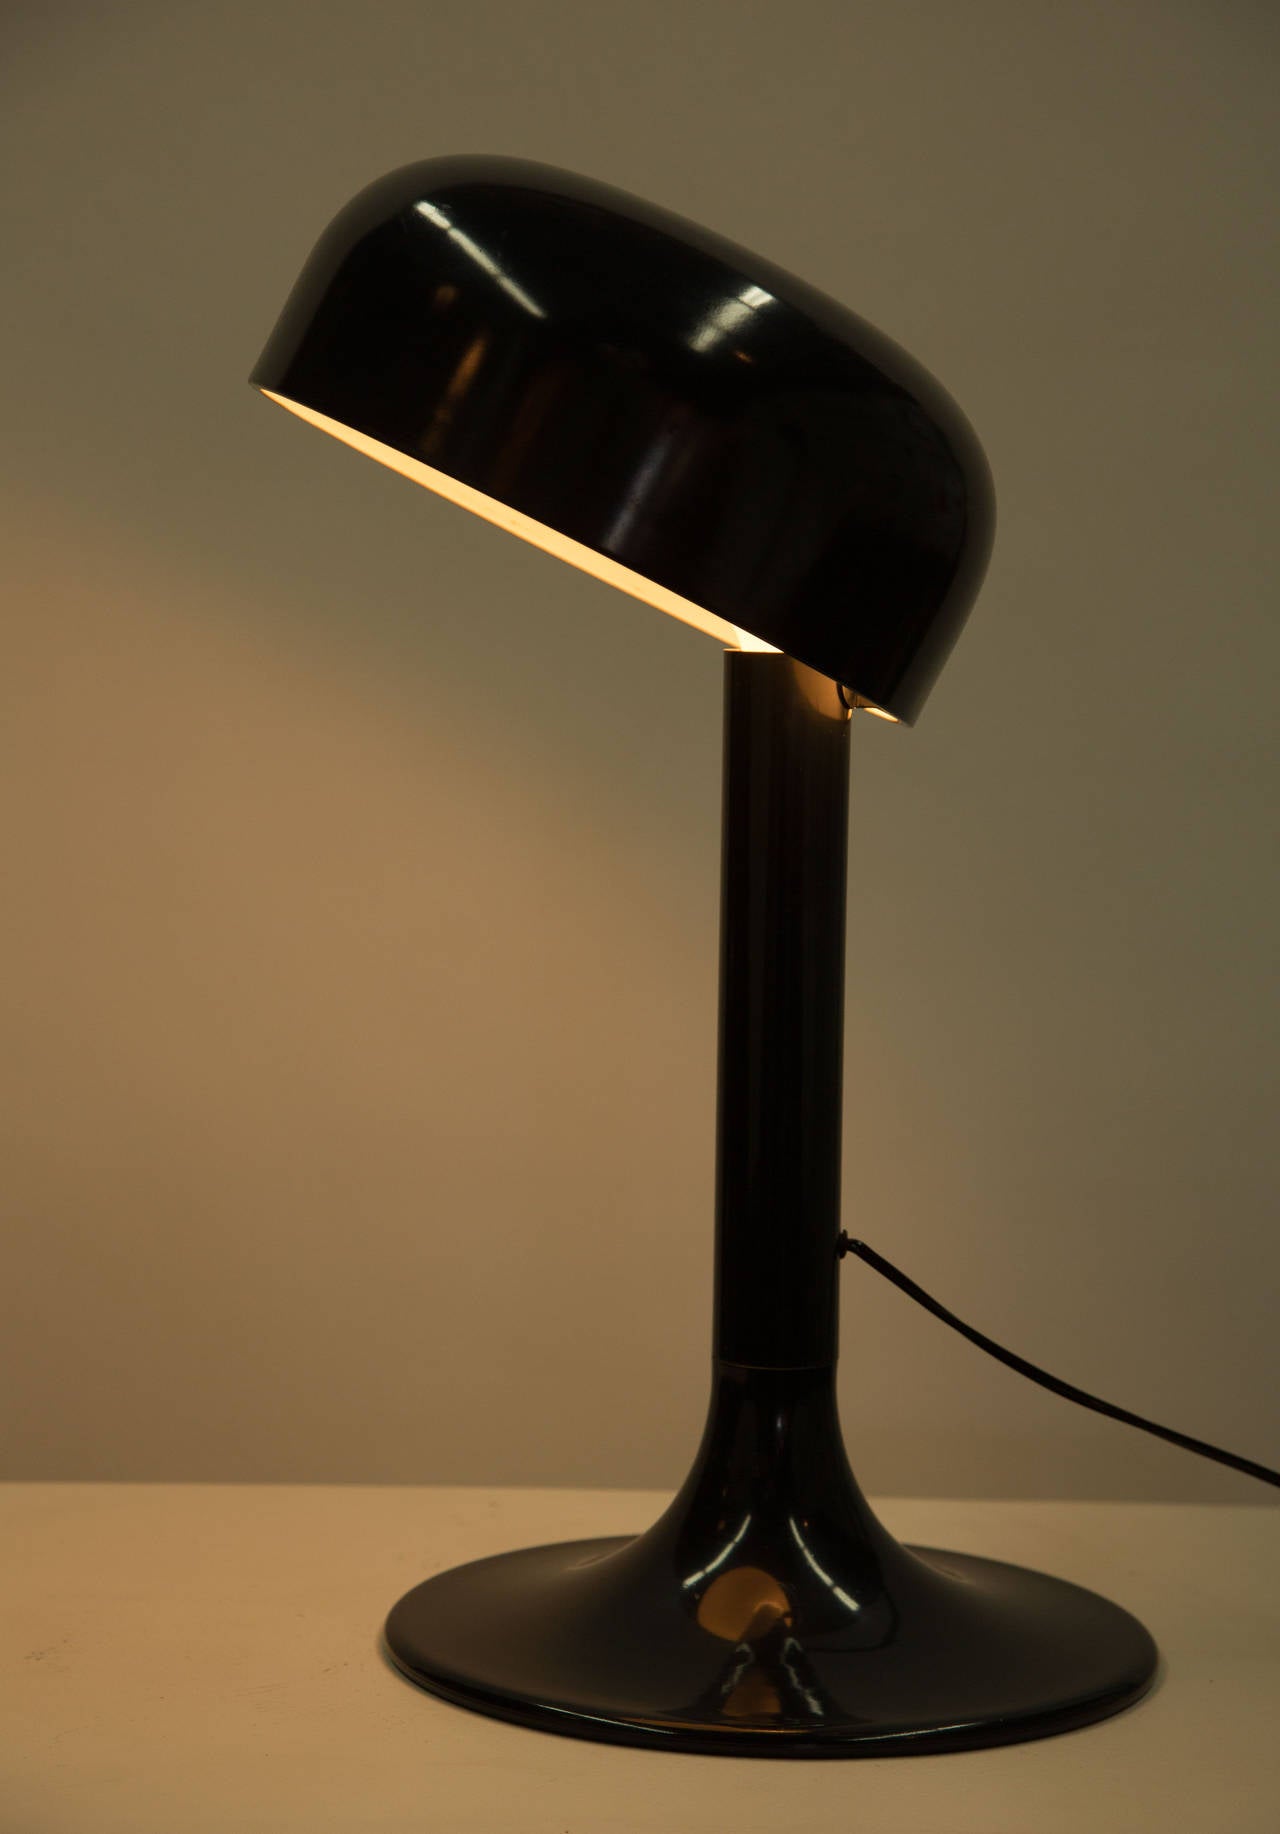 Model Number 3105 Table lamp Navy blue table lamp with articulating shade designed by Carlo Viligiardi for Stilnovo in 1973. Enameled aluminum